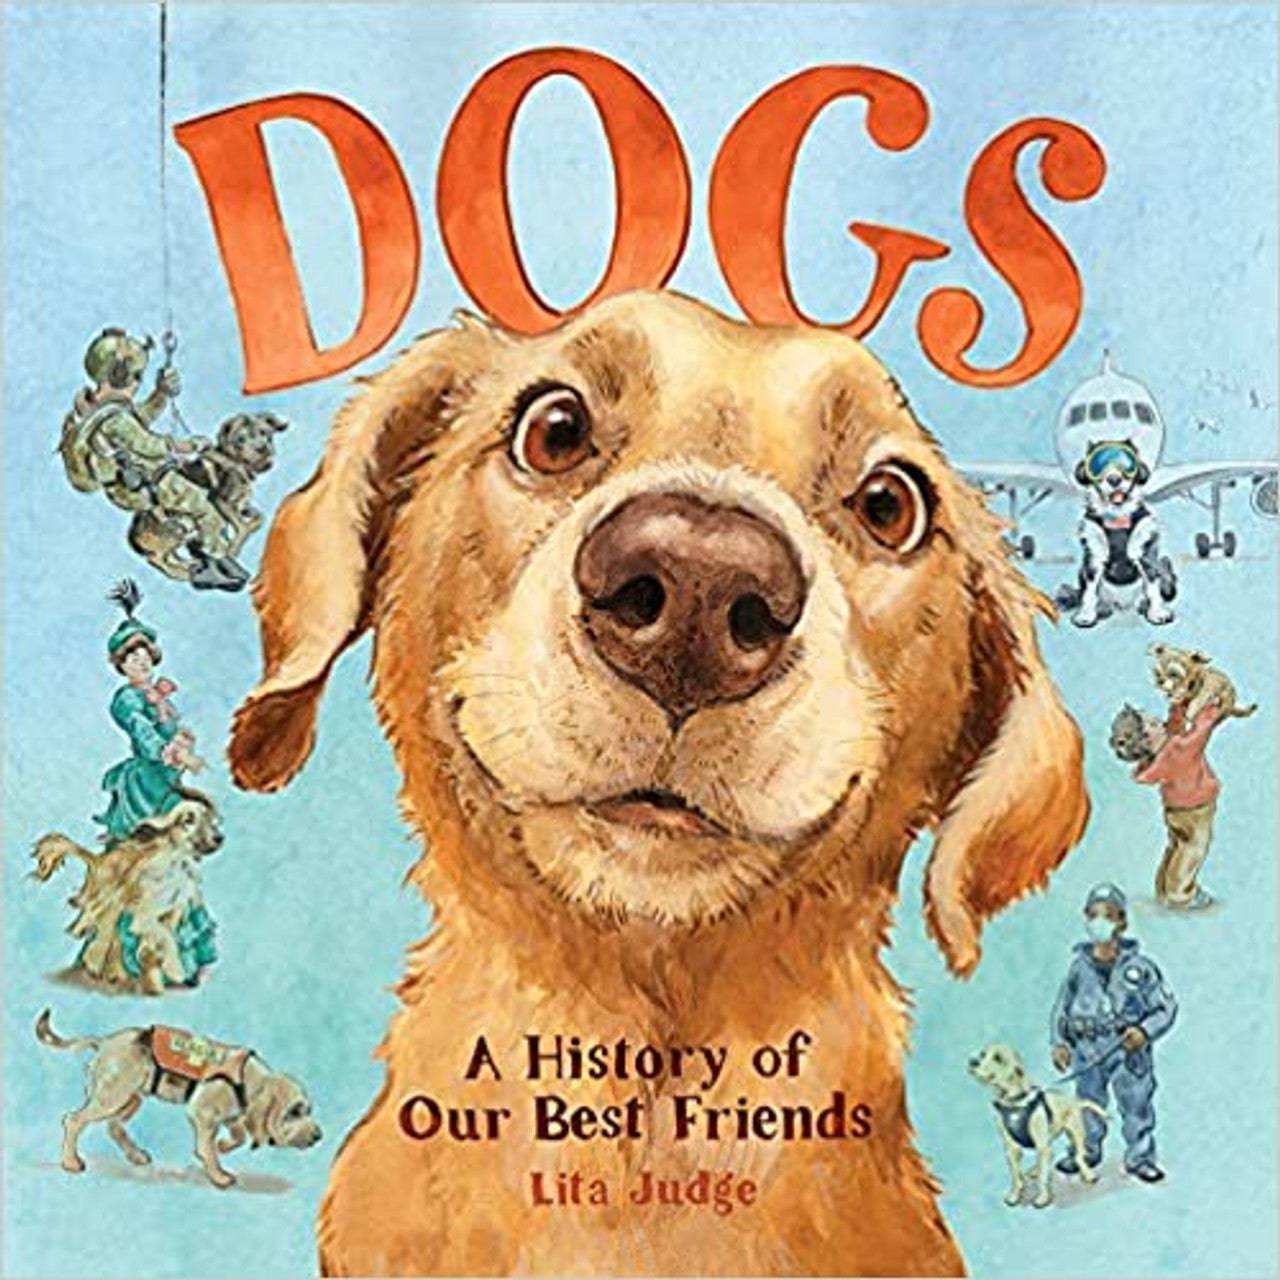 DOGS A HISTORY OF OUR BEST FRIENDS - Findlay Rowe Designs